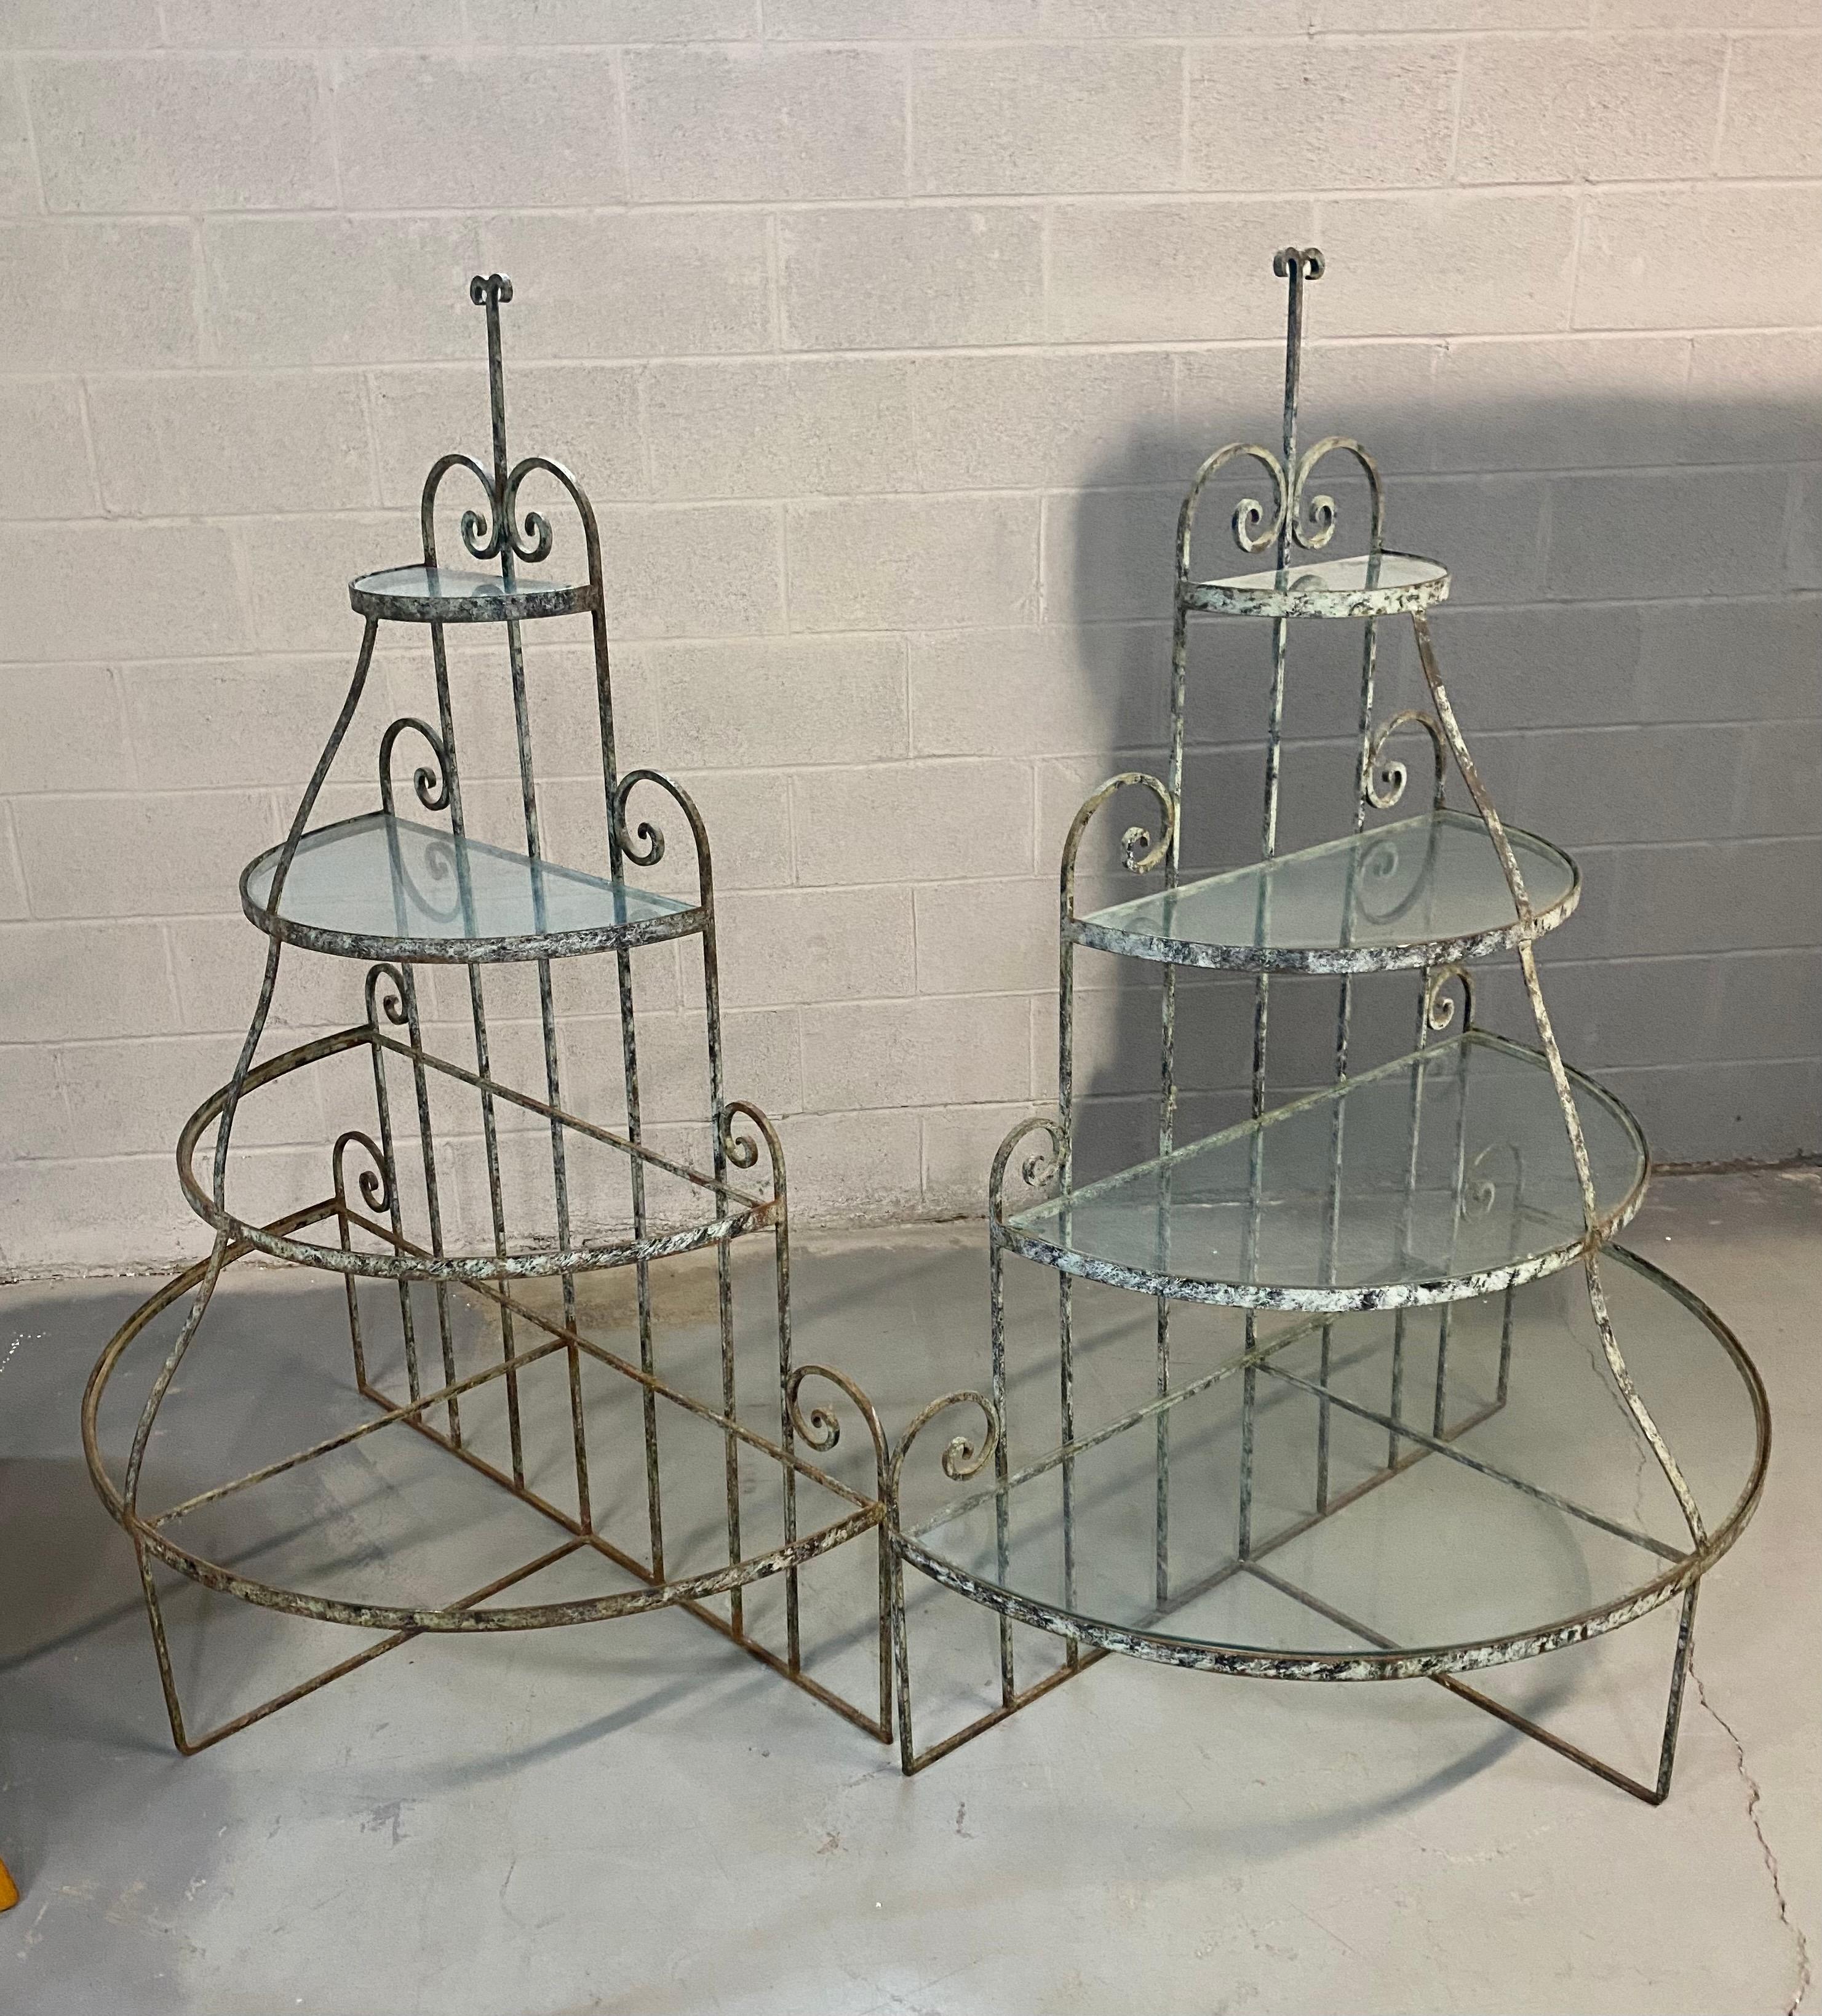 Mid-20th Century Pair of Art Deco Wrought Iron Store Displays / Stands / Fixtures /Shelves For Sale